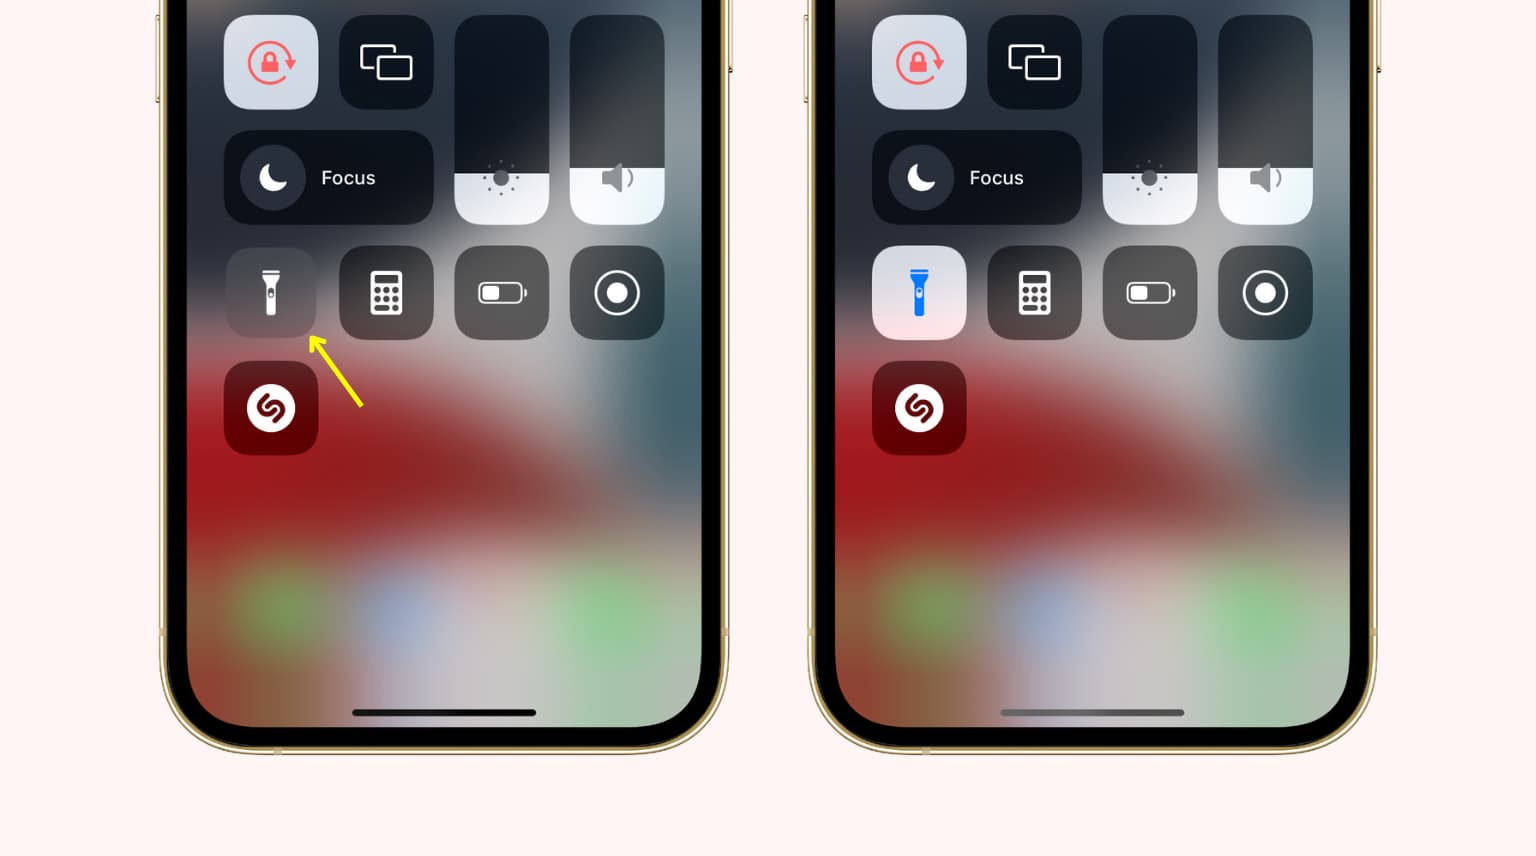 Locating Flashlight: Finding The Flashlight Feature On IPhone 10